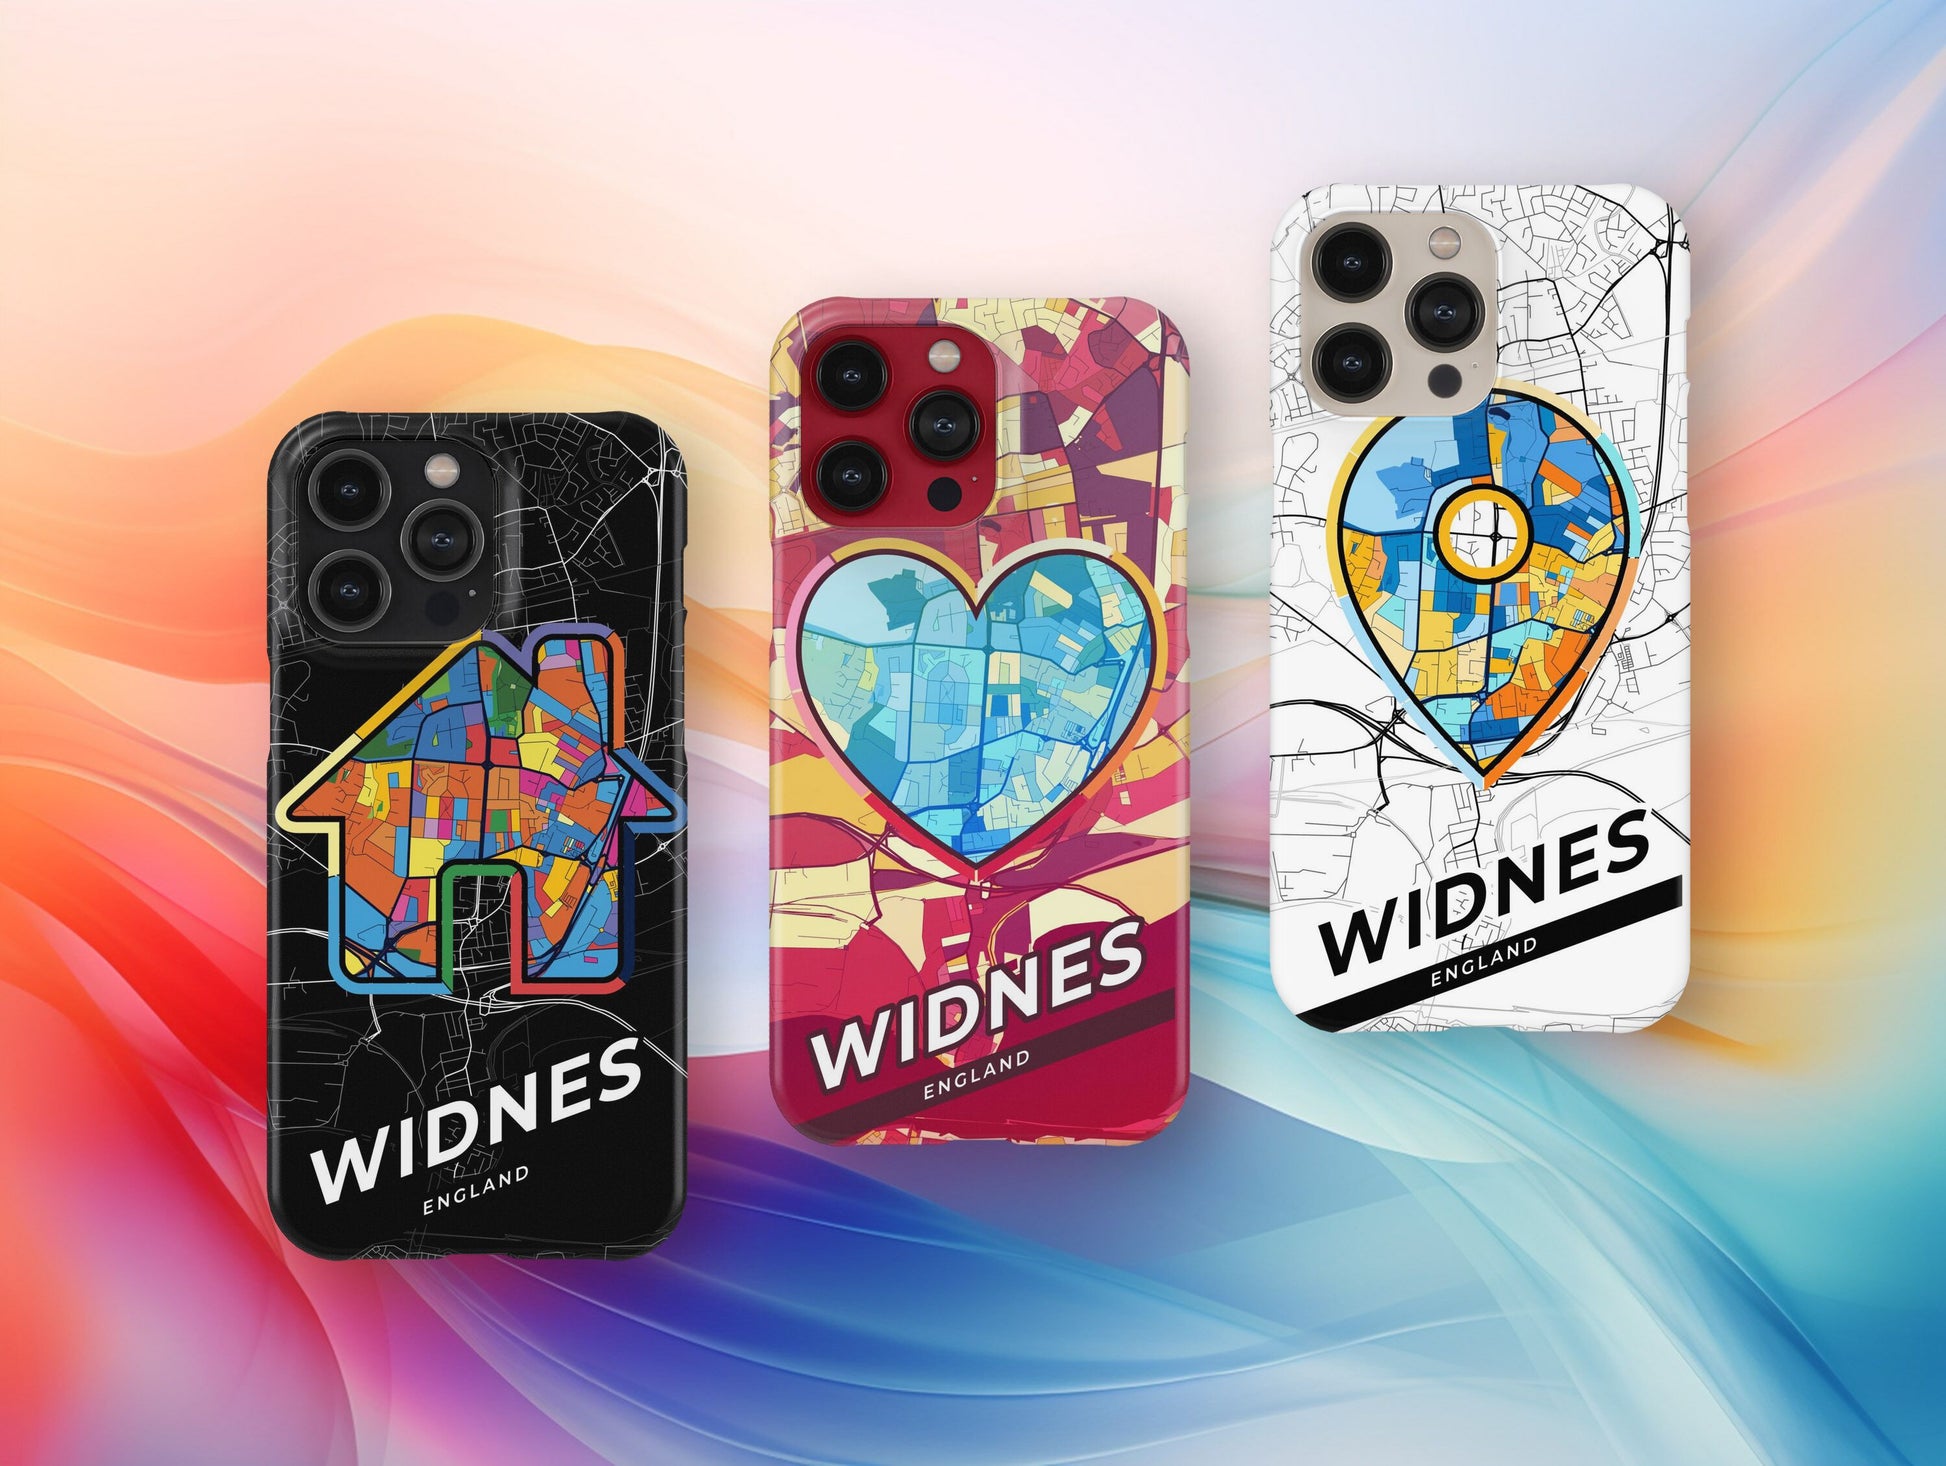 Widnes England slim phone case with colorful icon